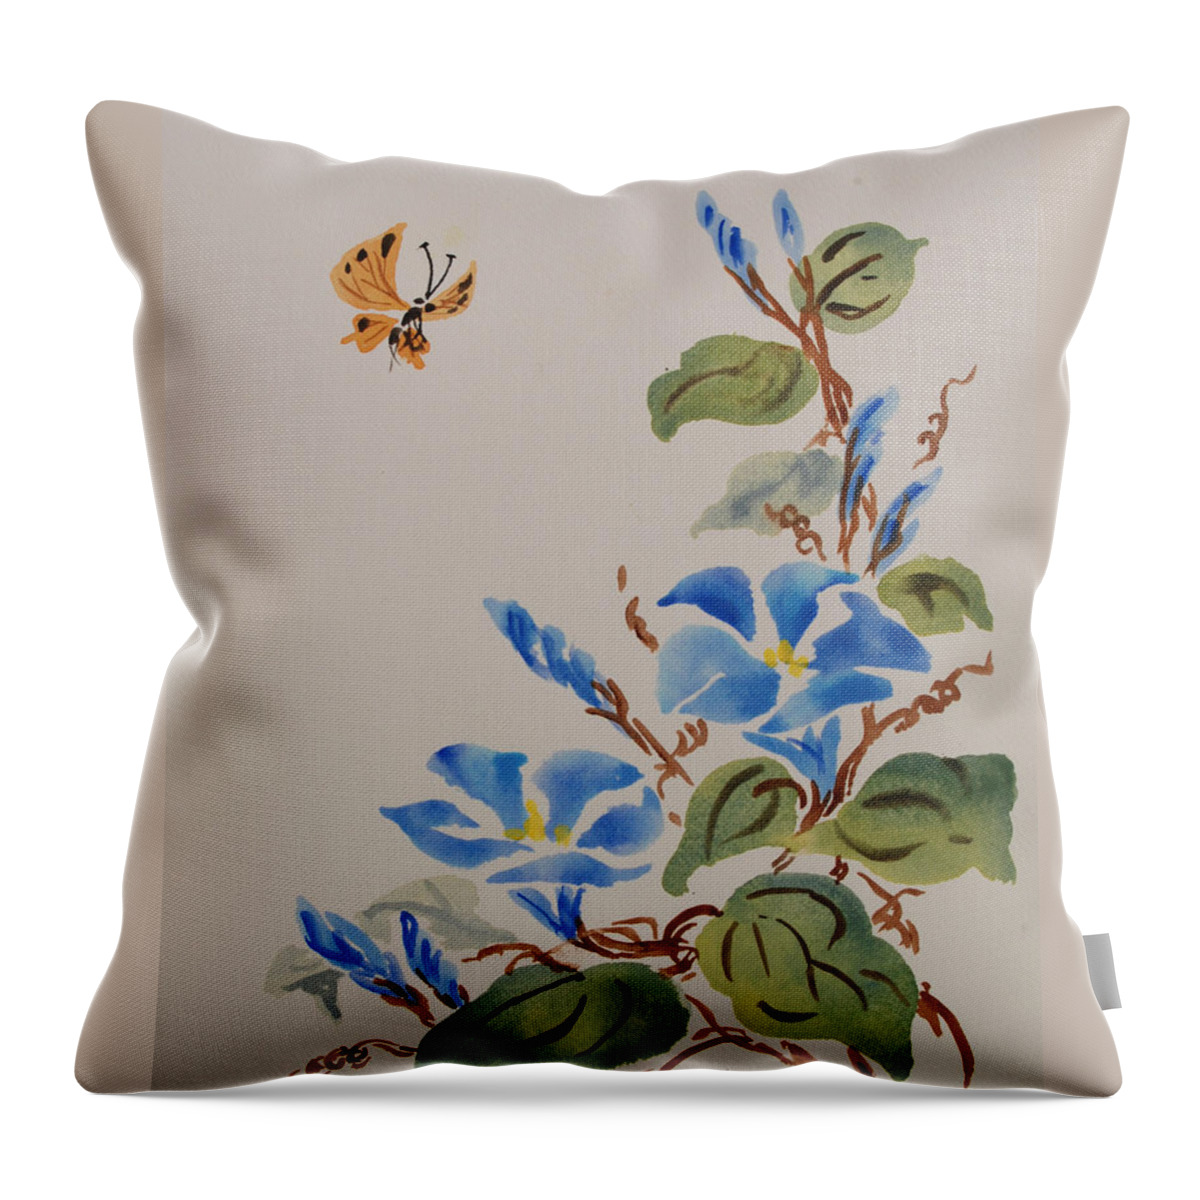 Floral Throw Pillow featuring the painting Morning Glories by Heidi E Nelson